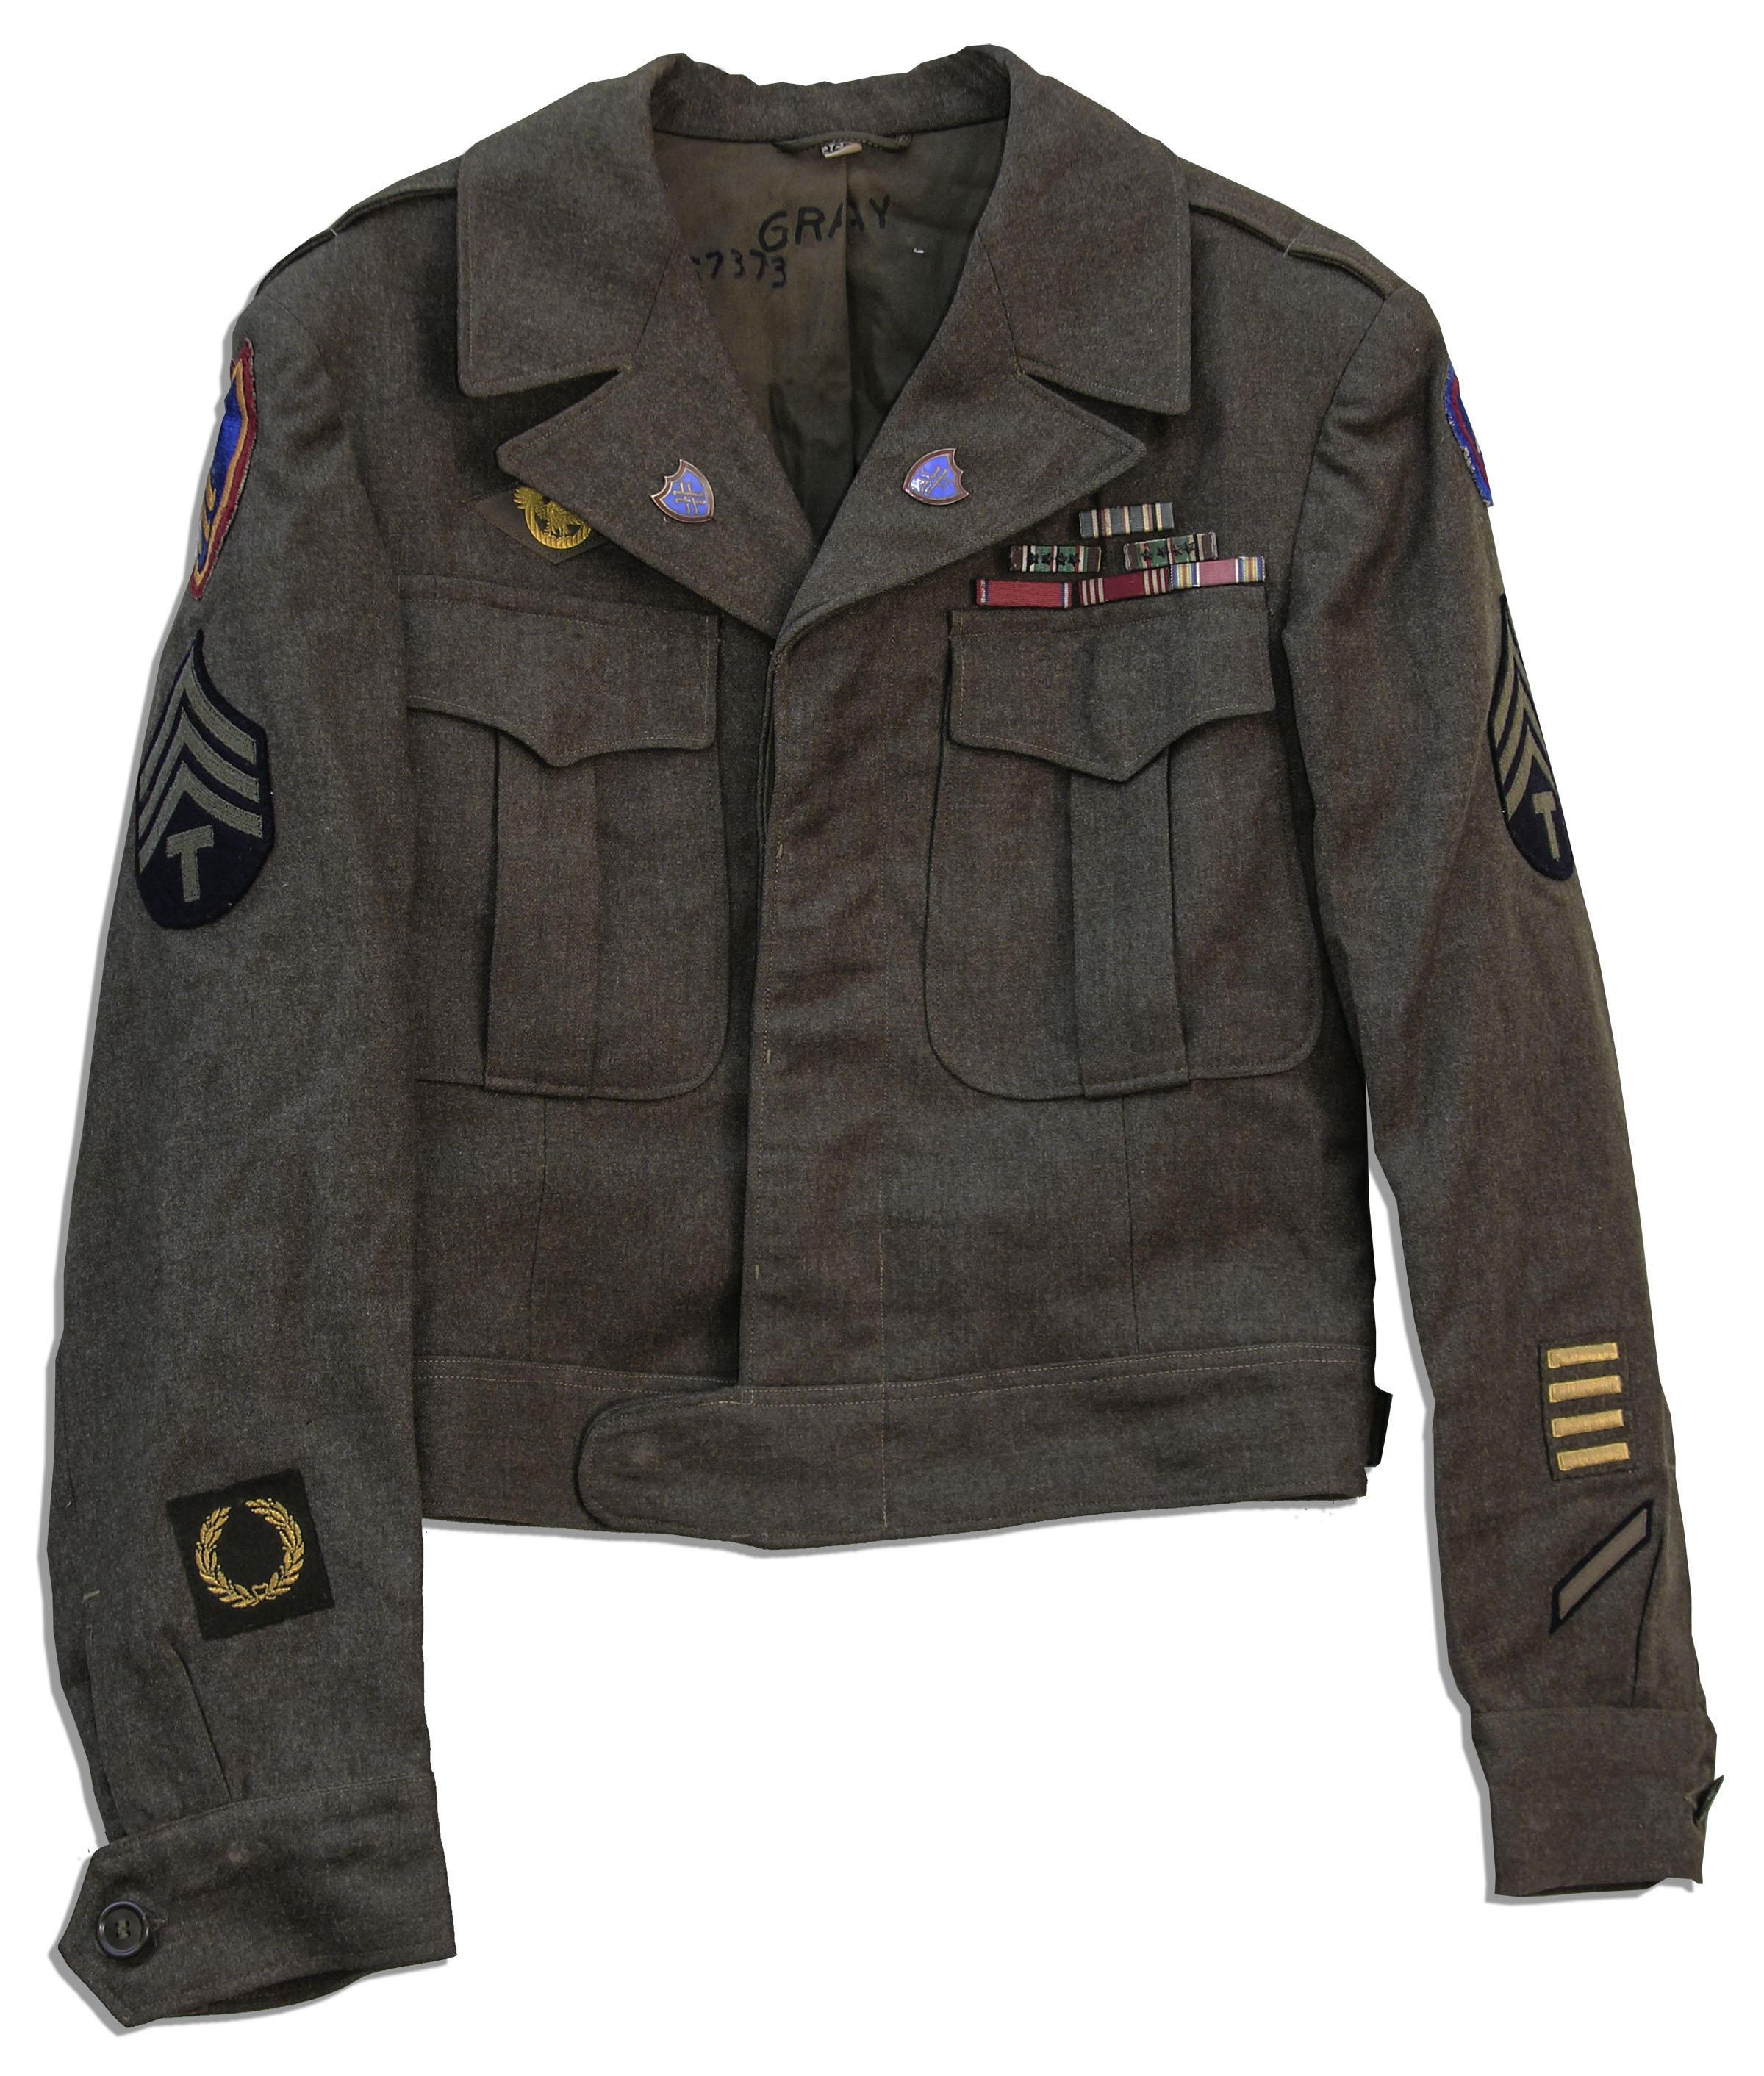 World War I & II Unique Collection of World War II Items Including a Full Uniform Worn by a Corporal - Image 4 of 9